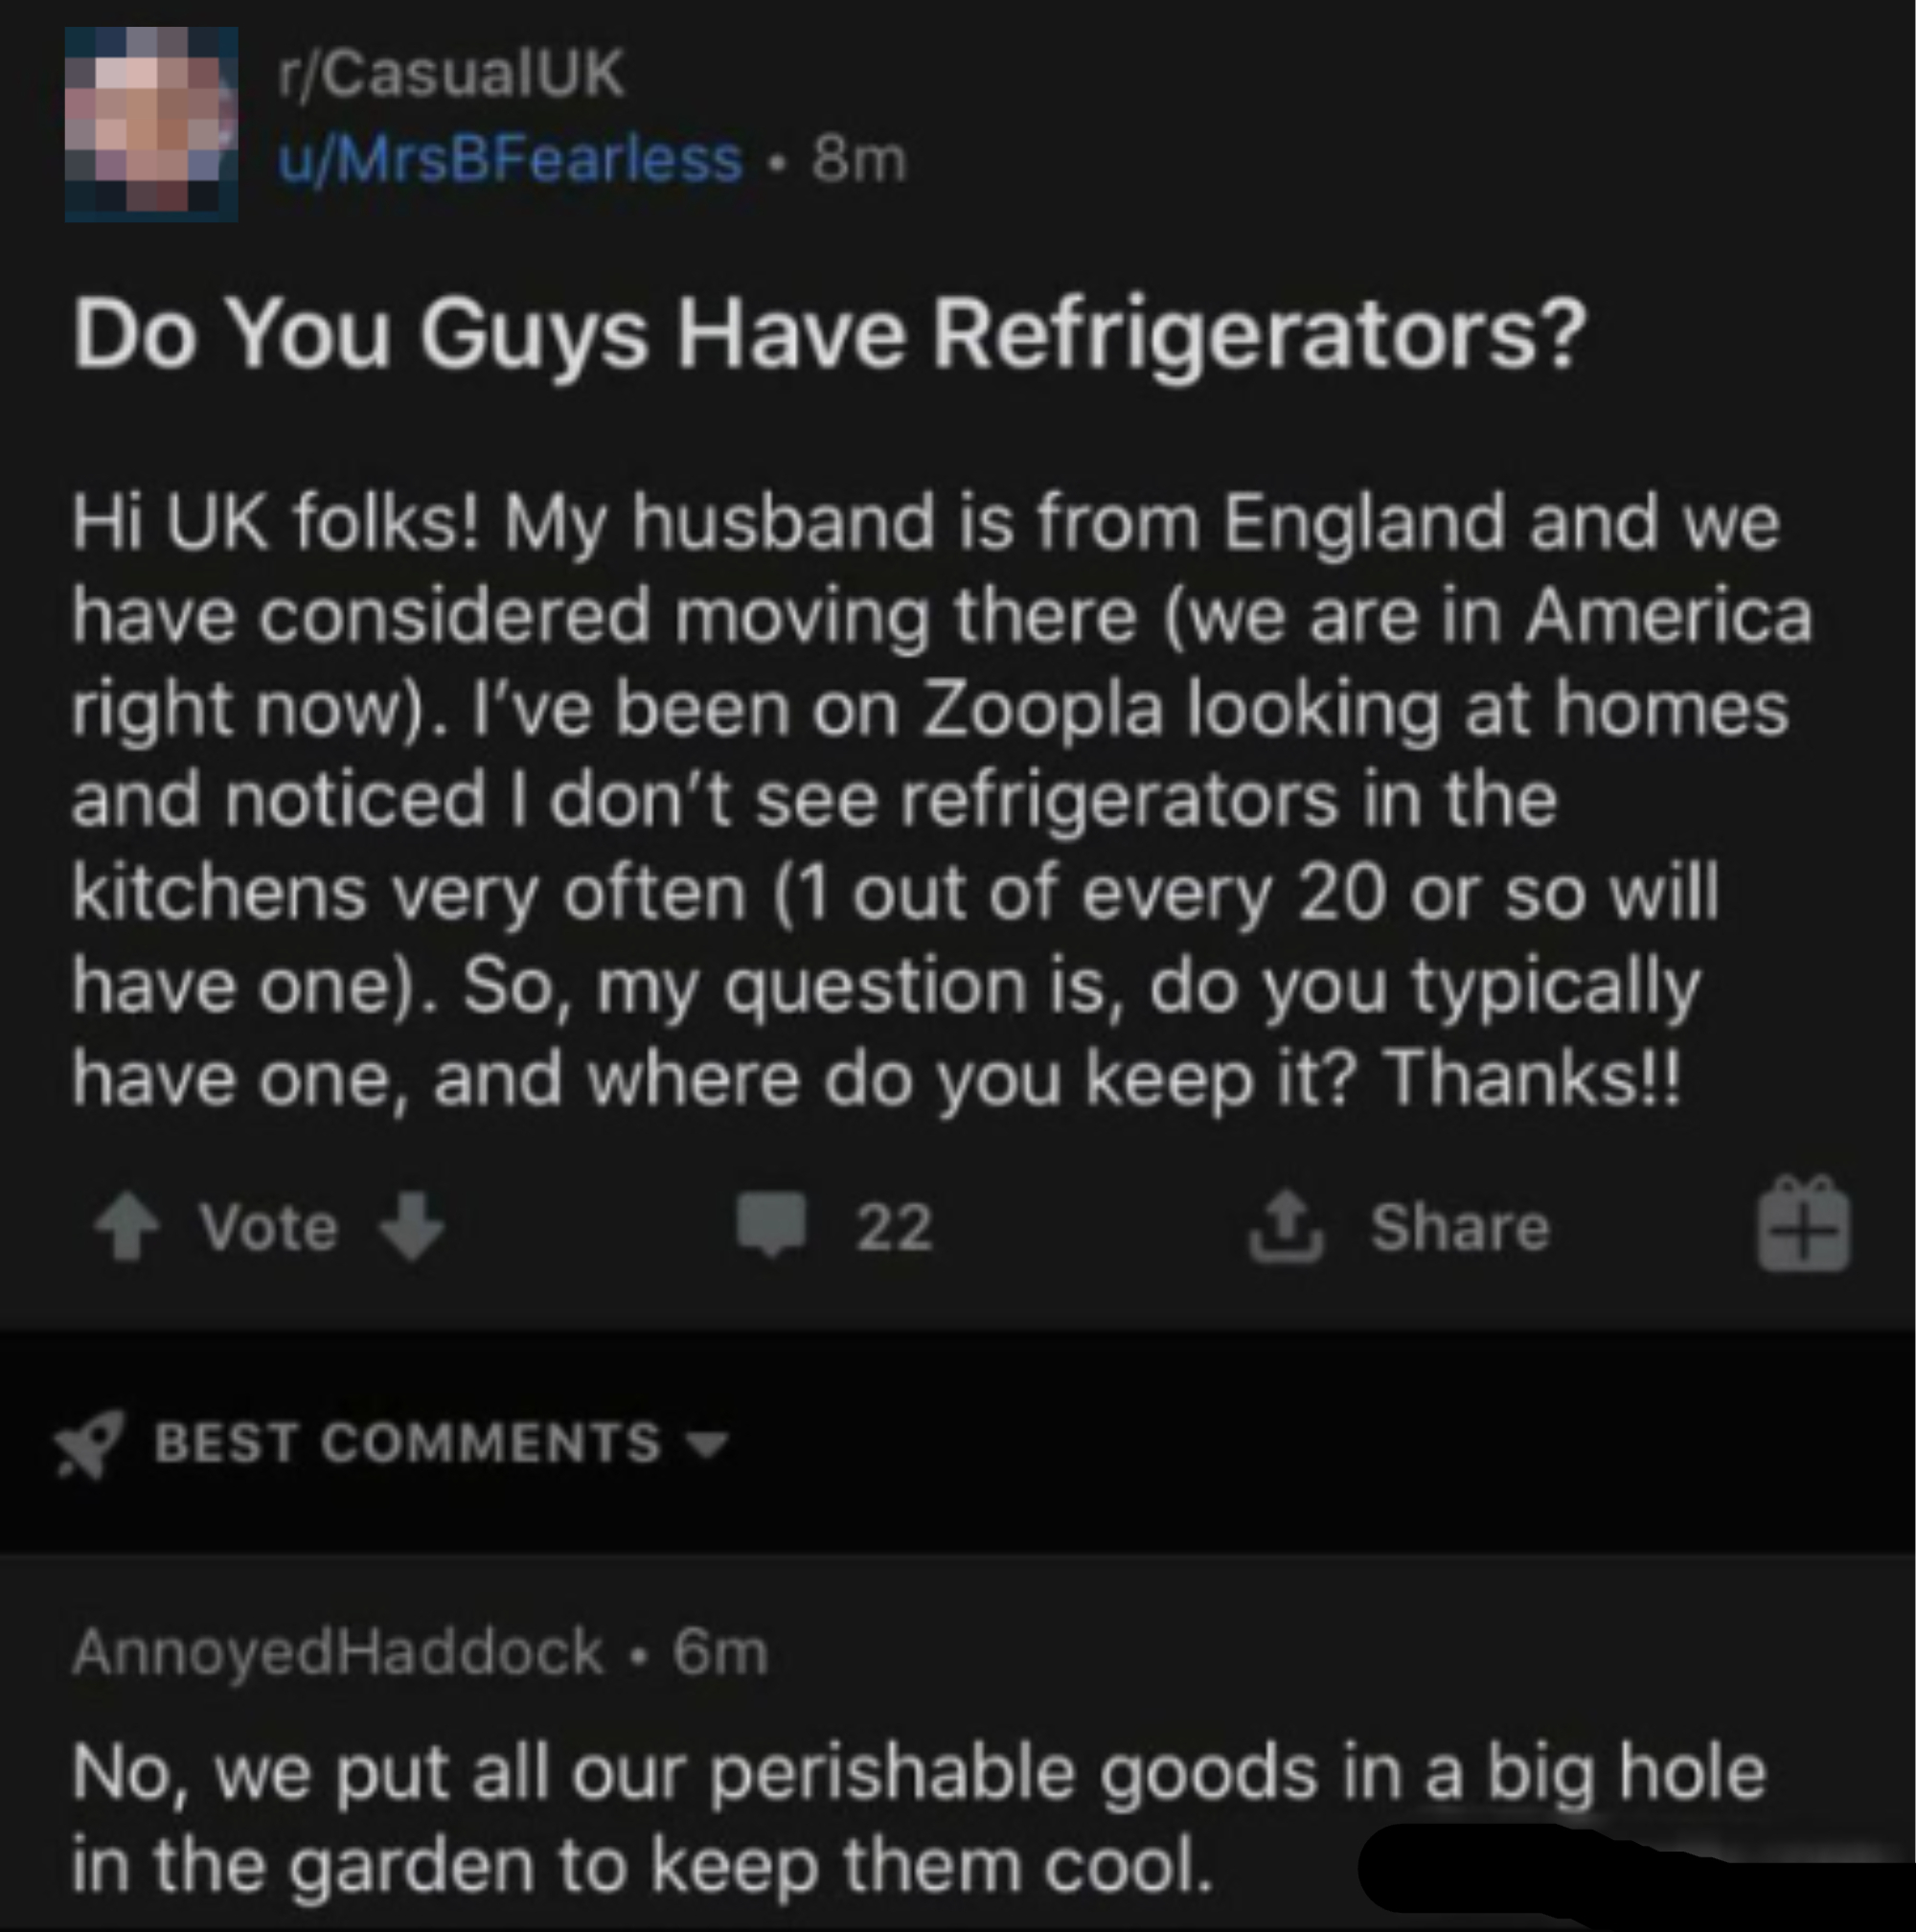 Reddit post asking about refrigerators in American and English homes, with a humorous reply about storing perishables in a hole